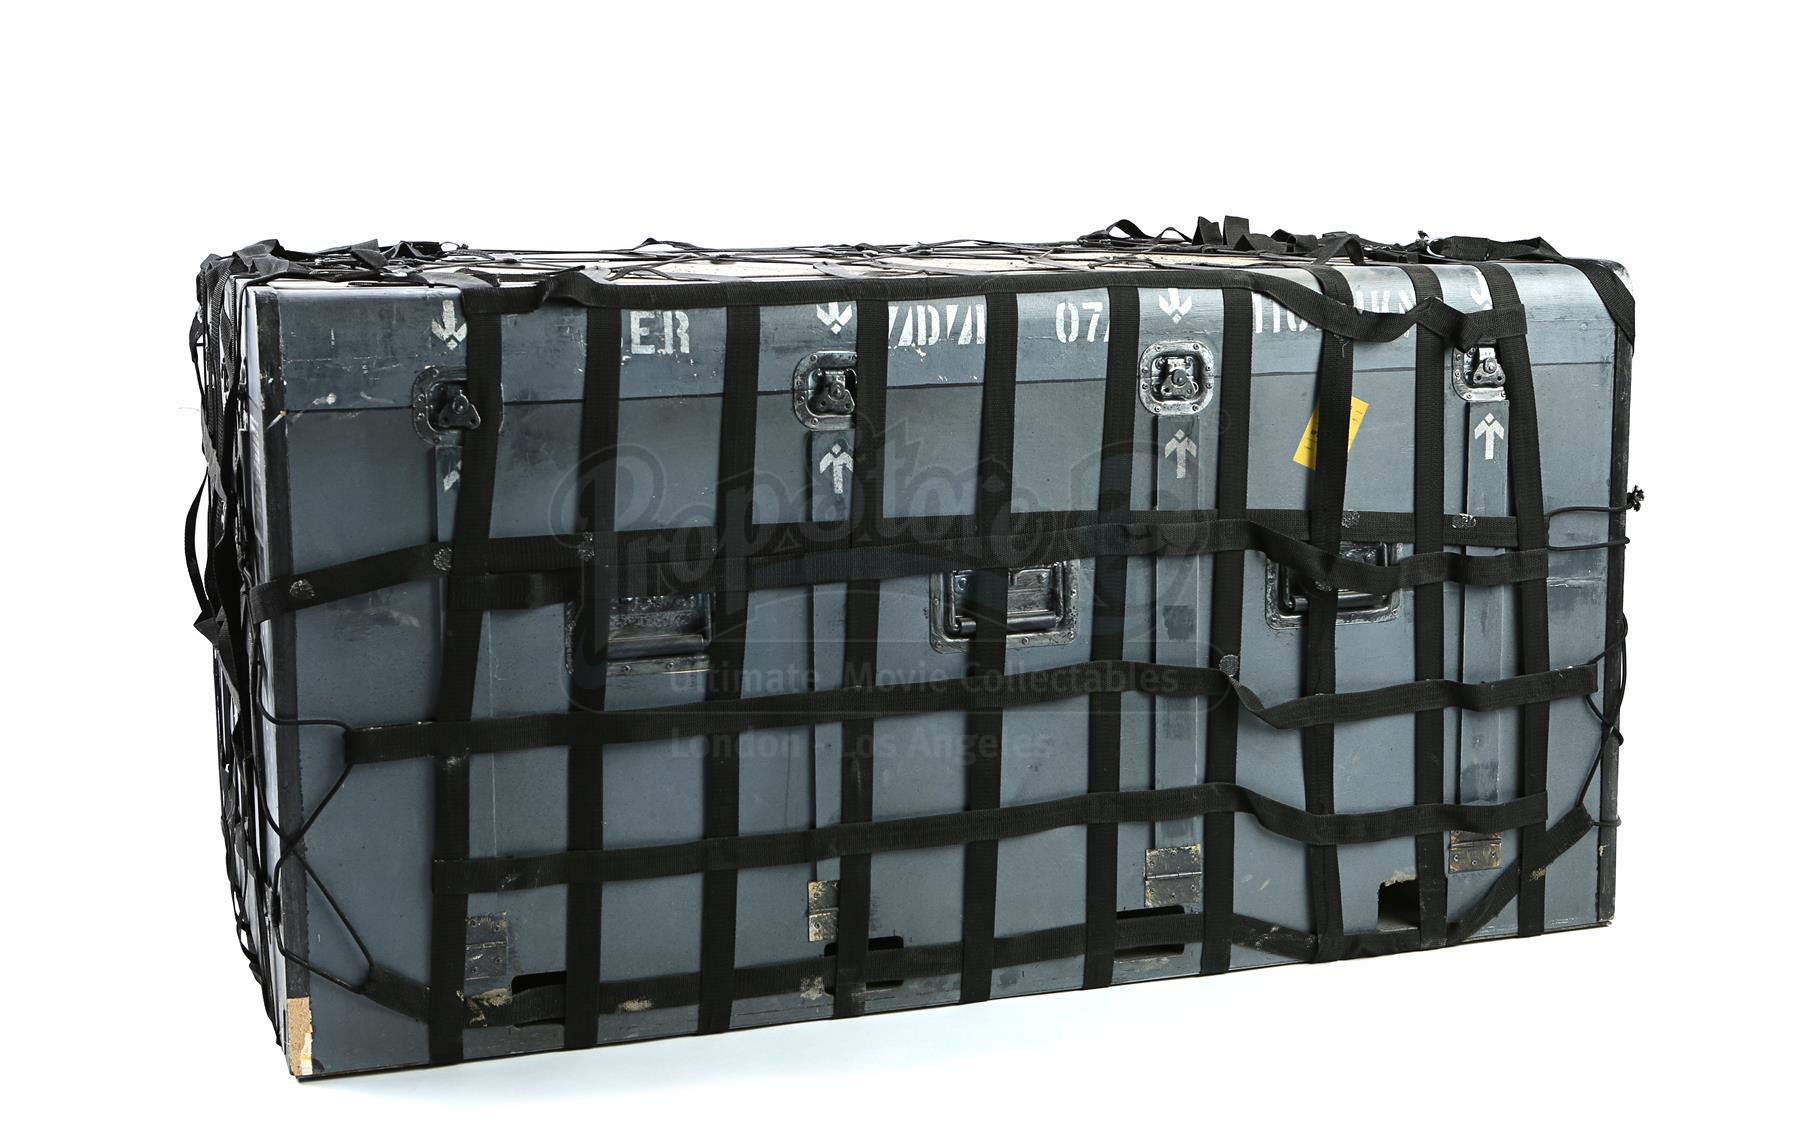 Air Drop Supply Crate - Current price: $130